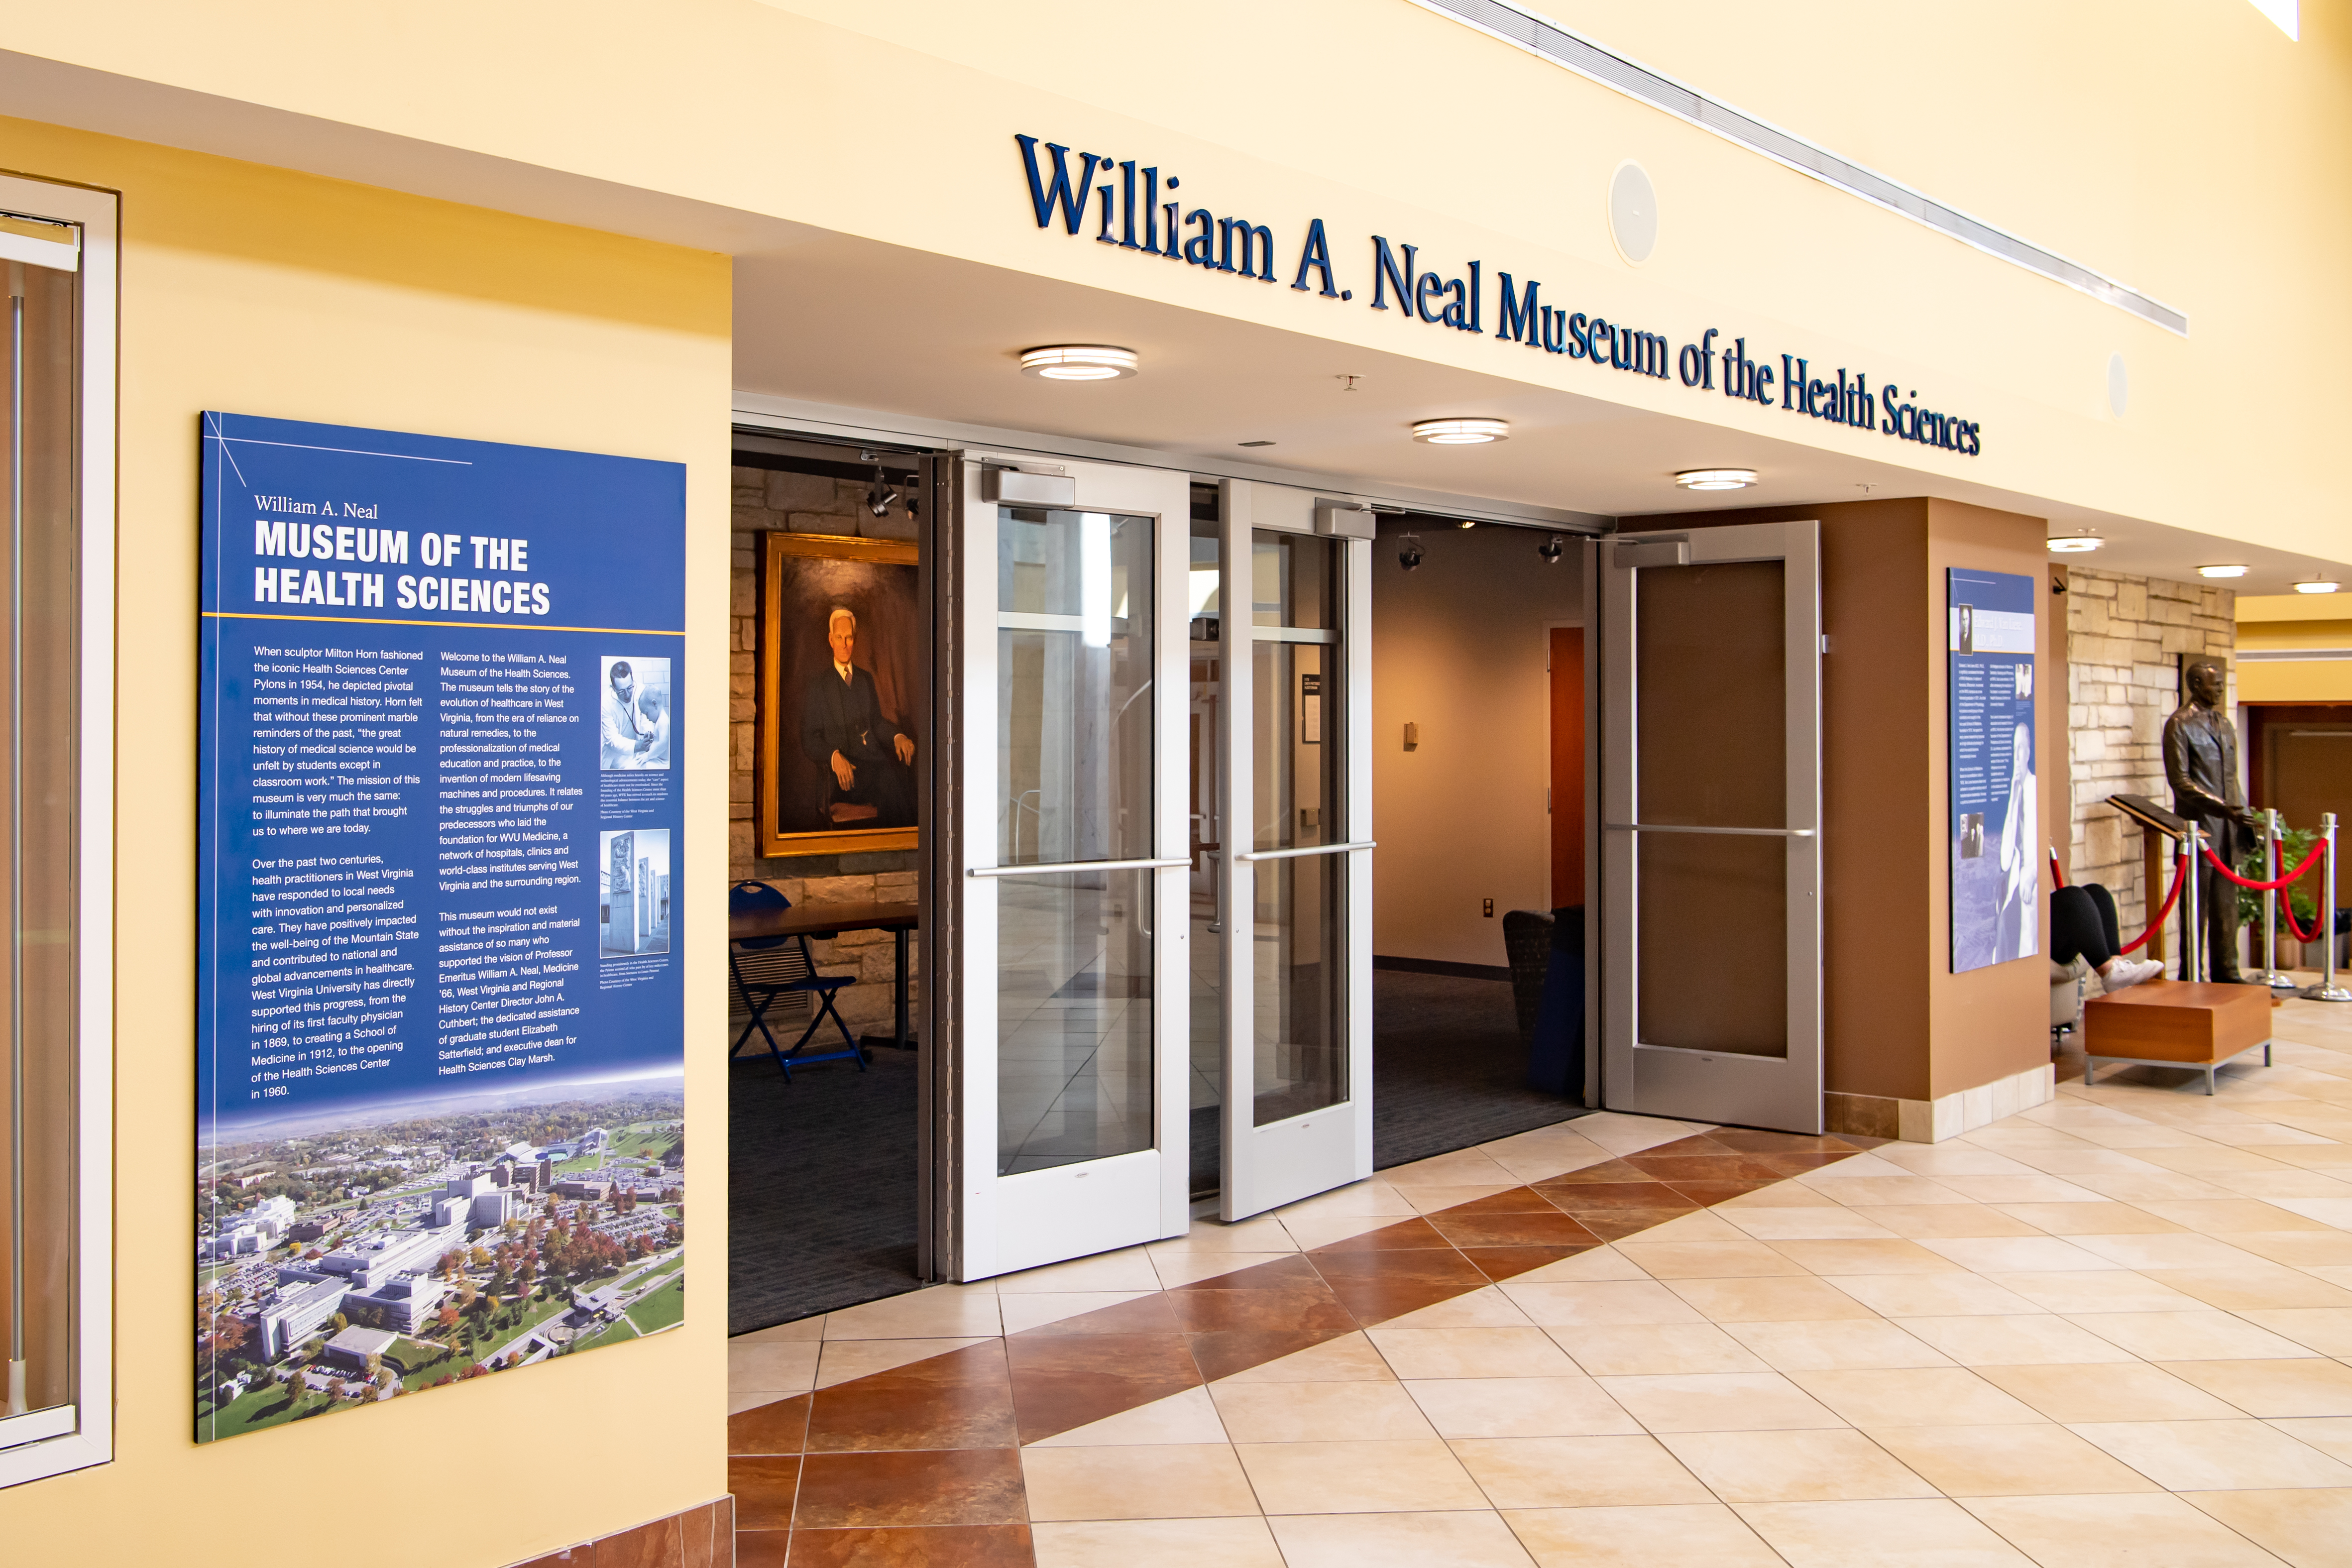 Entrance to the William A. Neal Museum of the Health Sciences